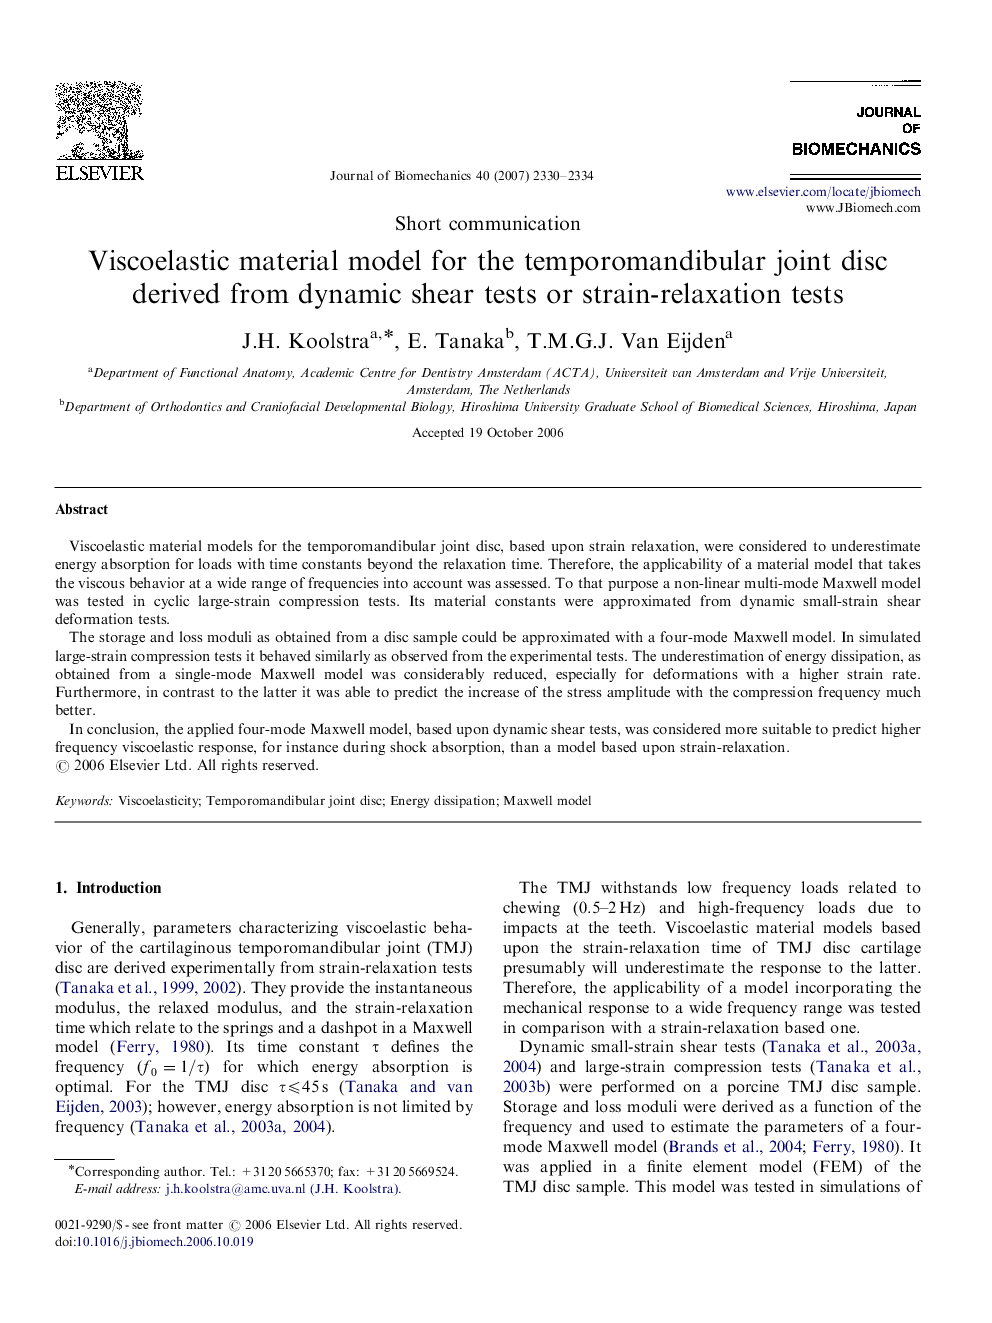 Viscoelastic material model for the temporomandibular joint disc derived from dynamic shear tests or strain-relaxation tests